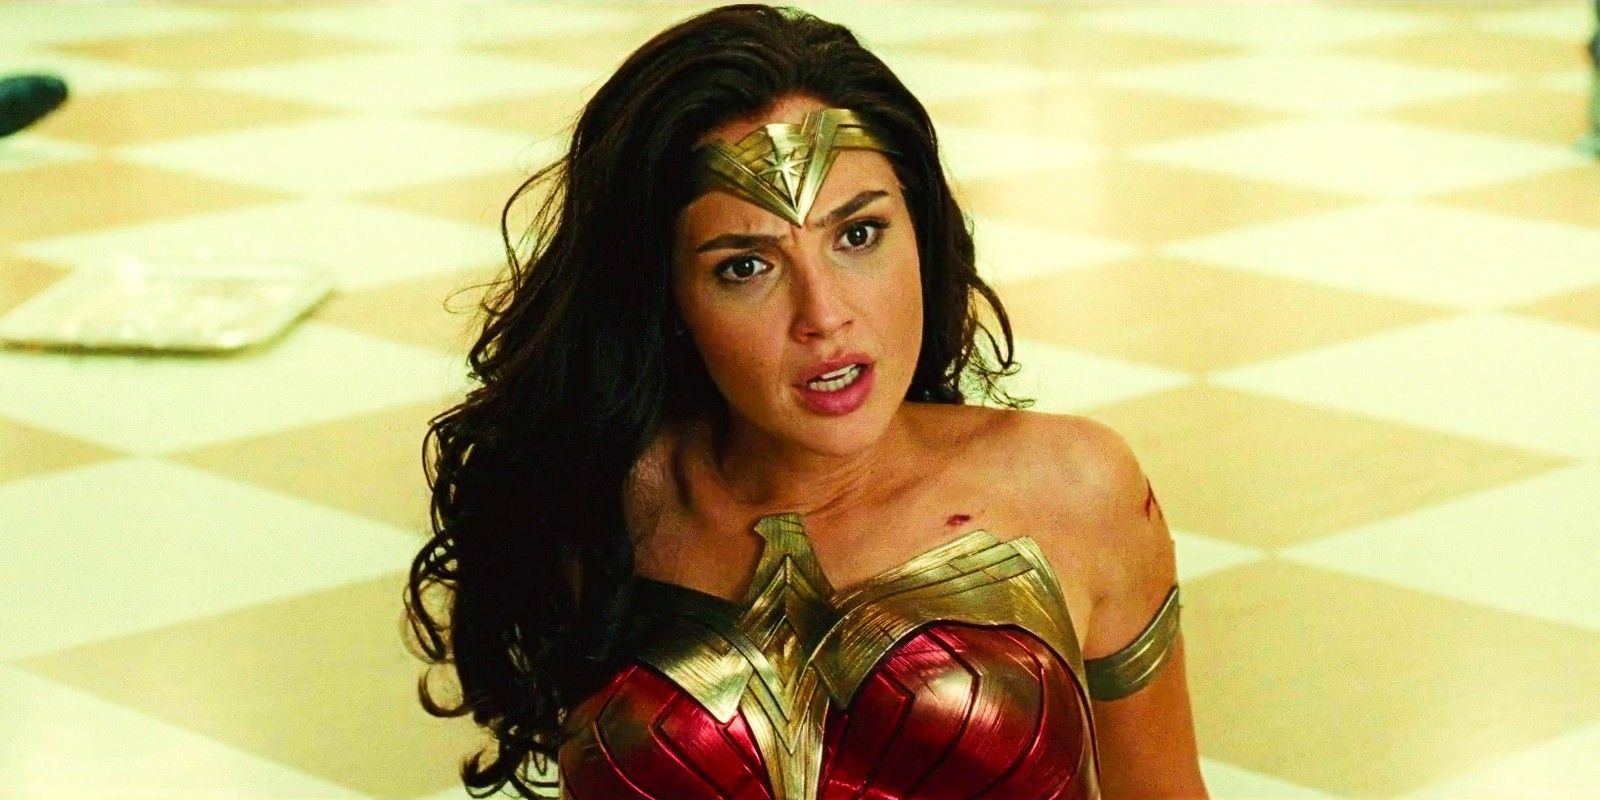 dc-is-"not-interested"-in-making-a-new-wonder-woman-movie-right-now-despite-2017’s-$800m-success